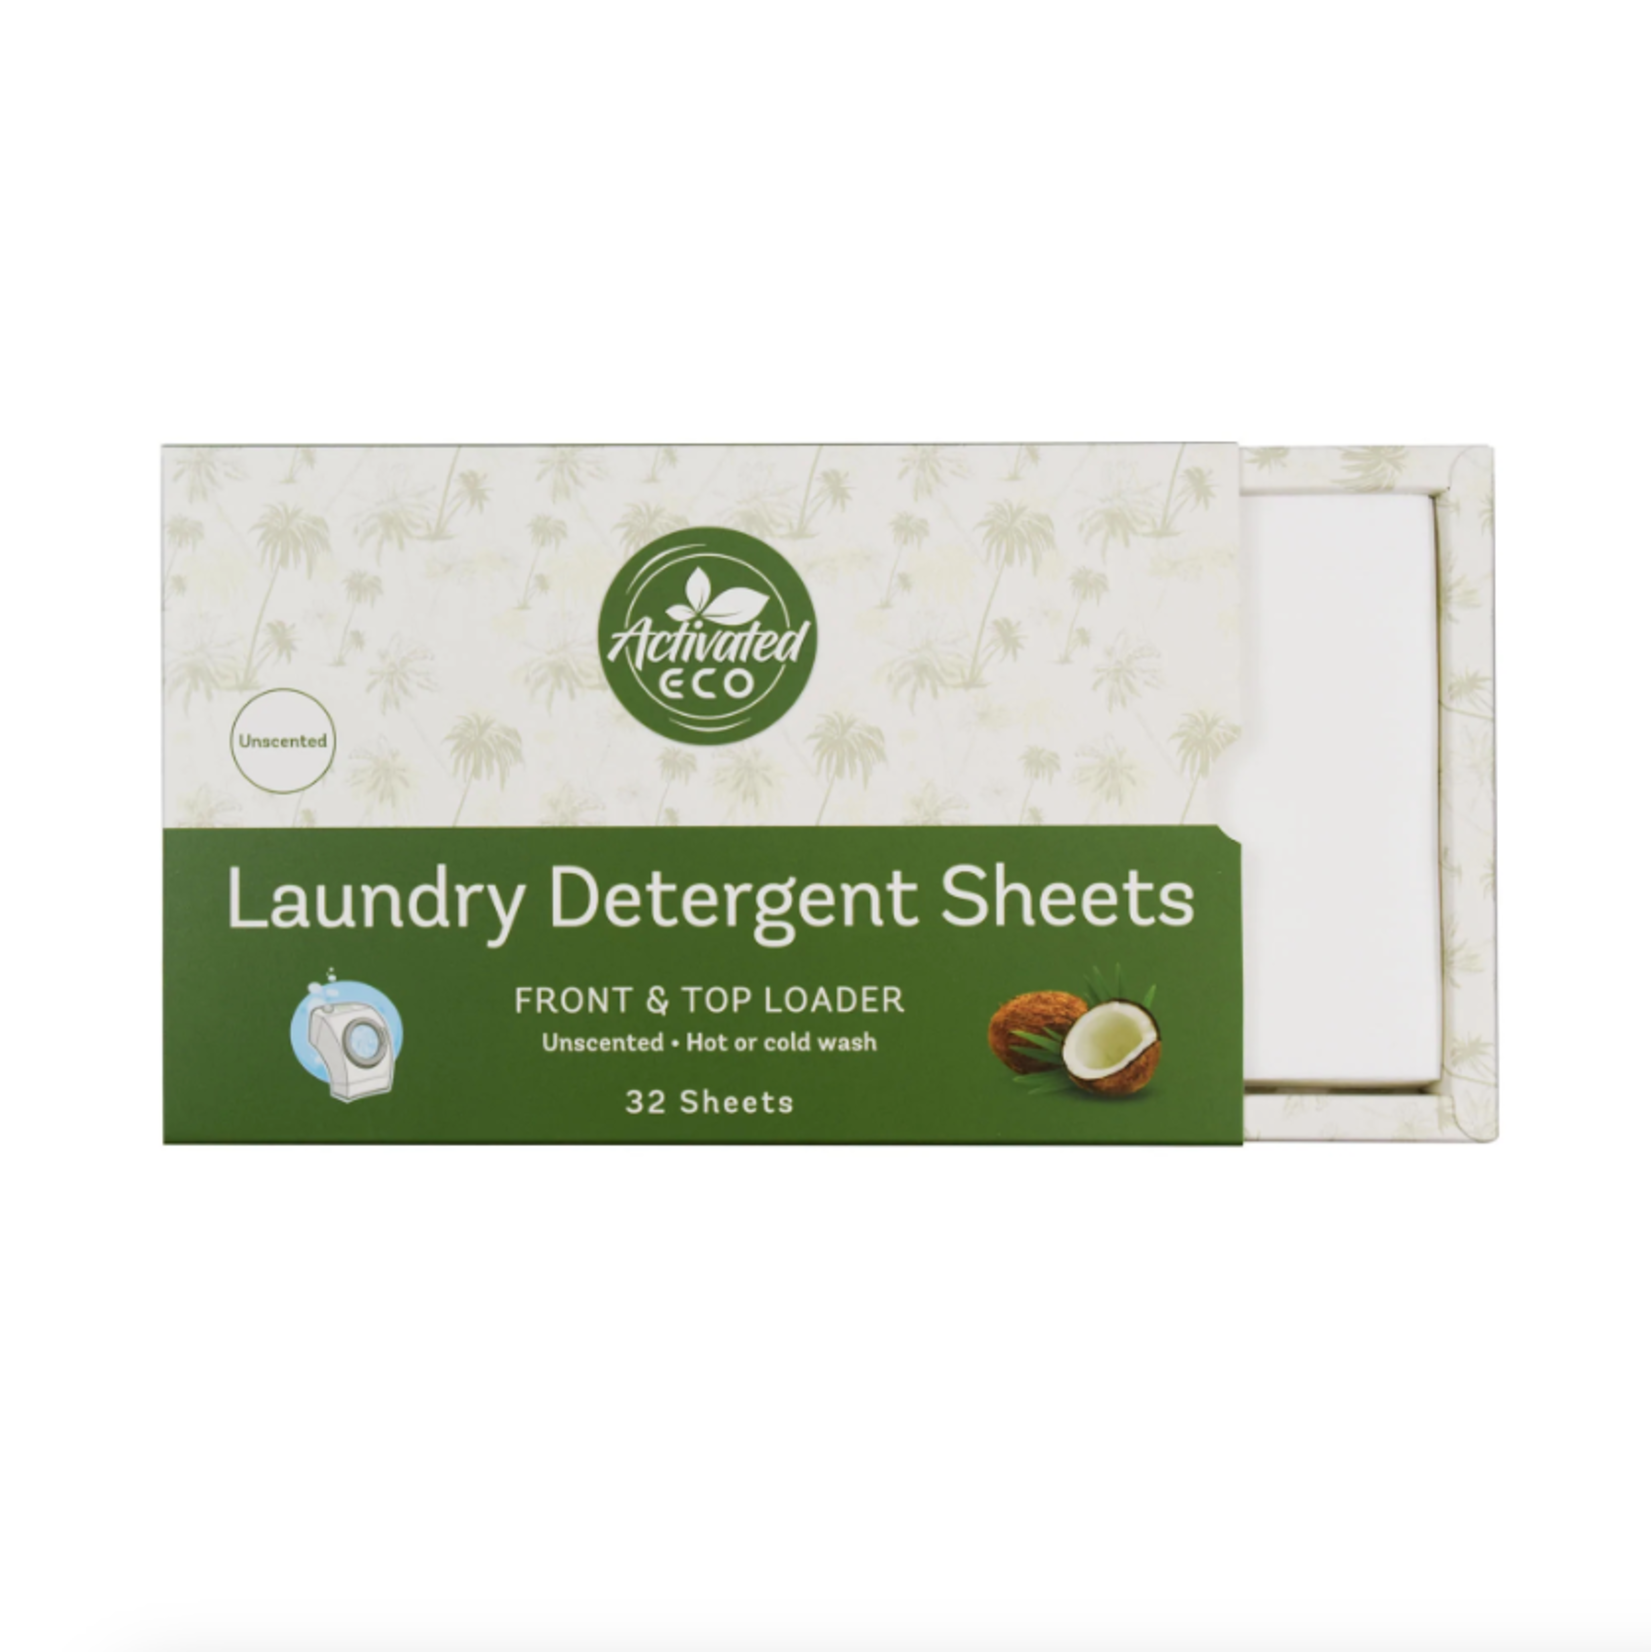 Activated Eco Laundry Detergent Sheets